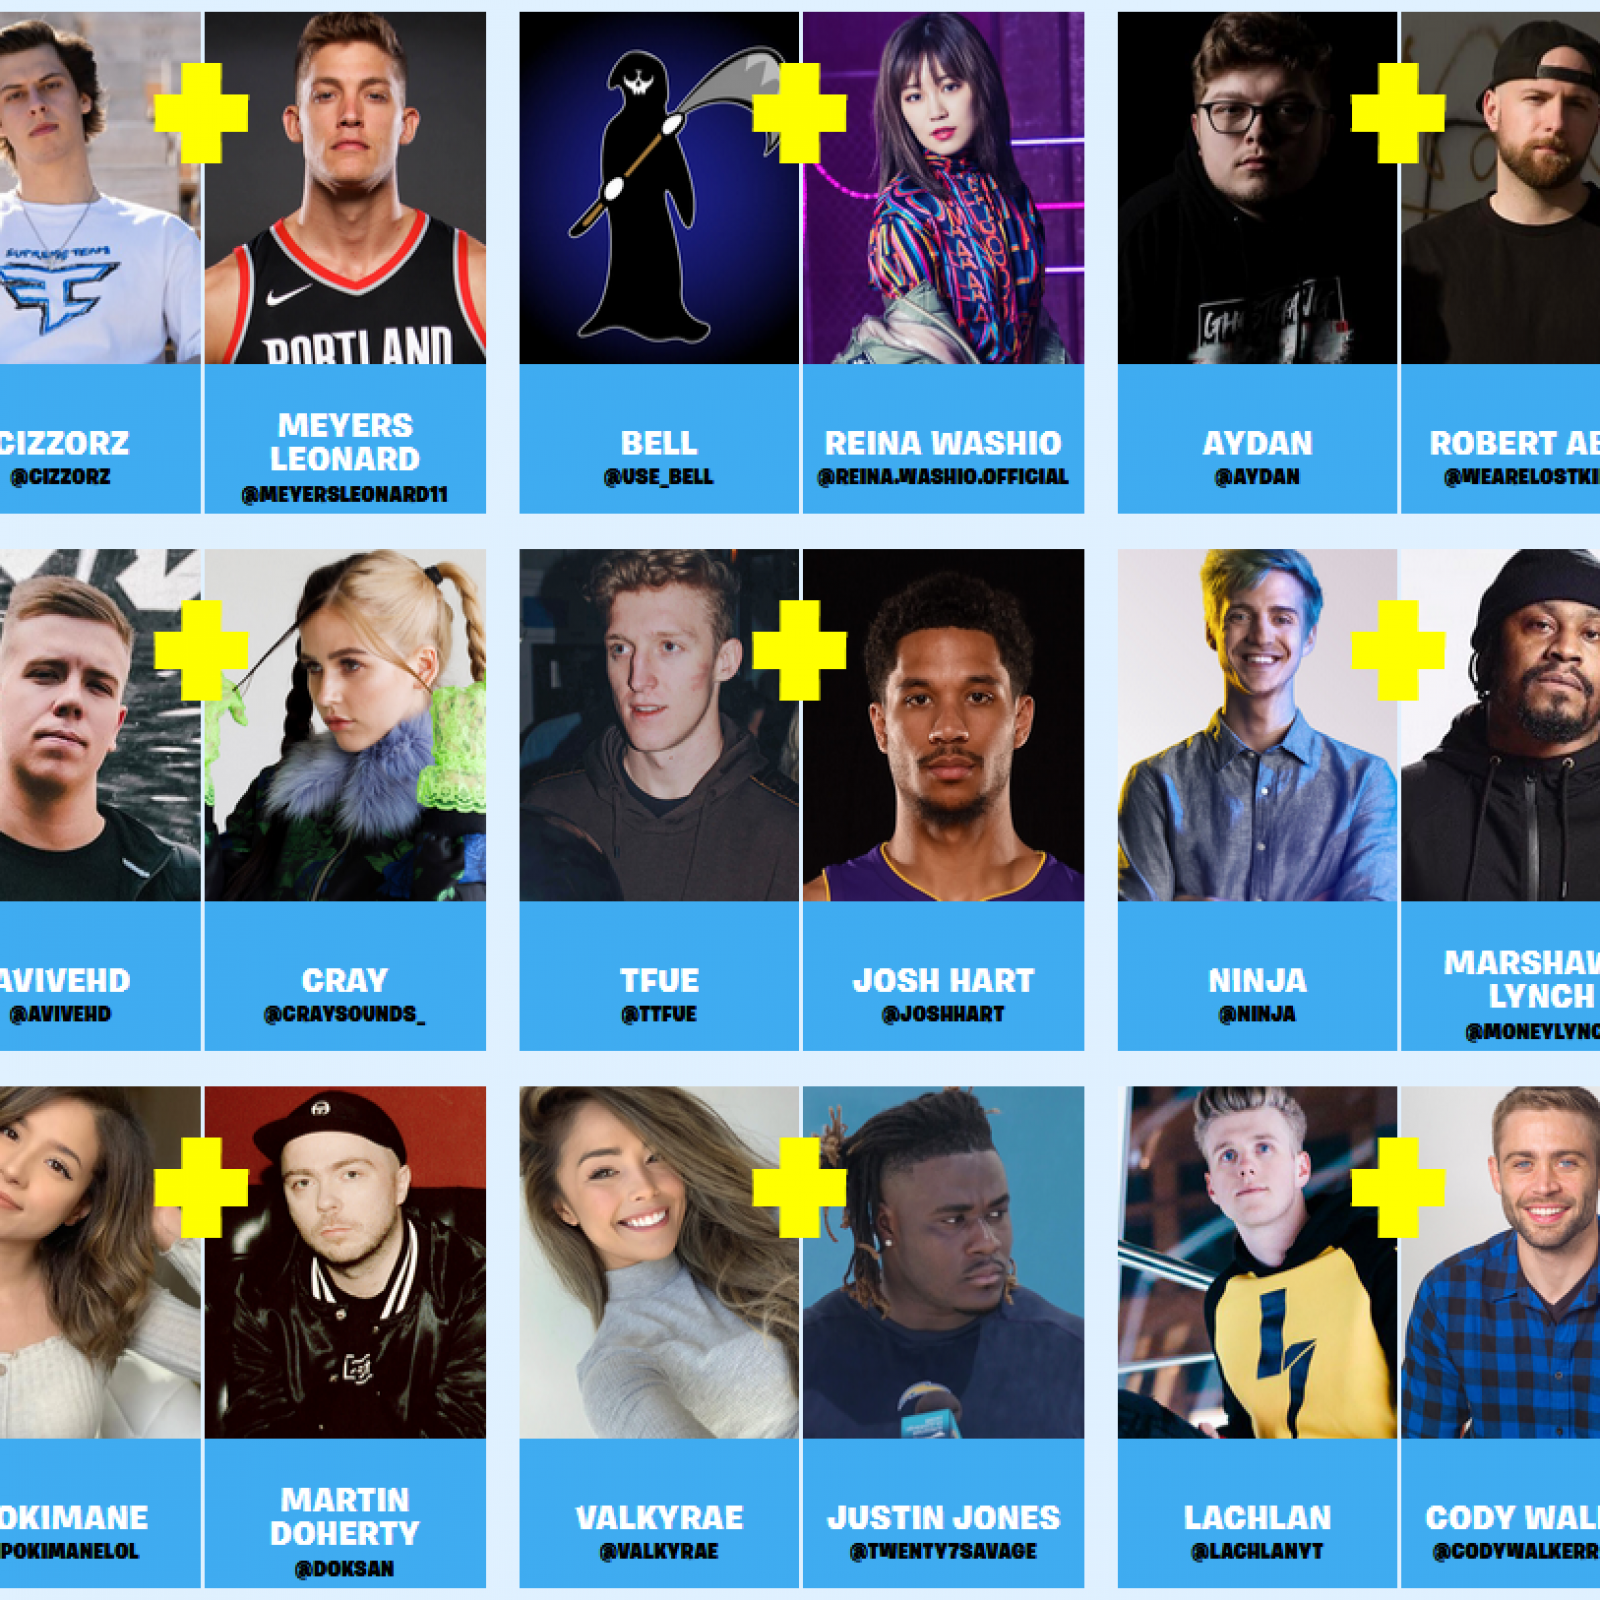 Who Won The 2019 Fortnite Pro Am Fortnite Celebrity Pro Am 2019 Time Standings Results Teams How To Watch